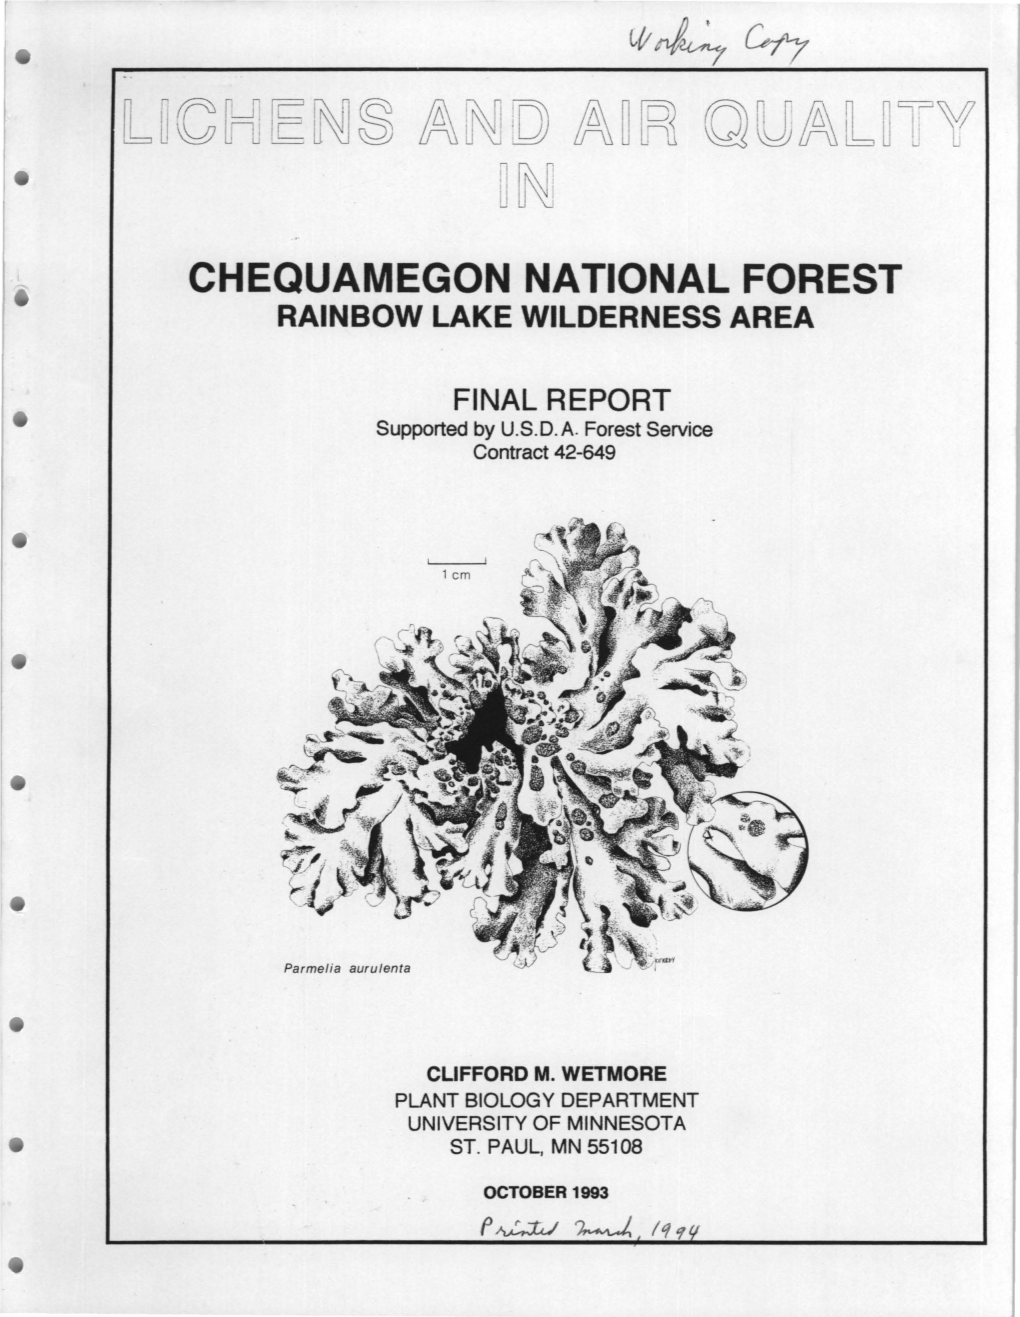 Chequamegon National Forest Rainbow Lake Wilderness Area